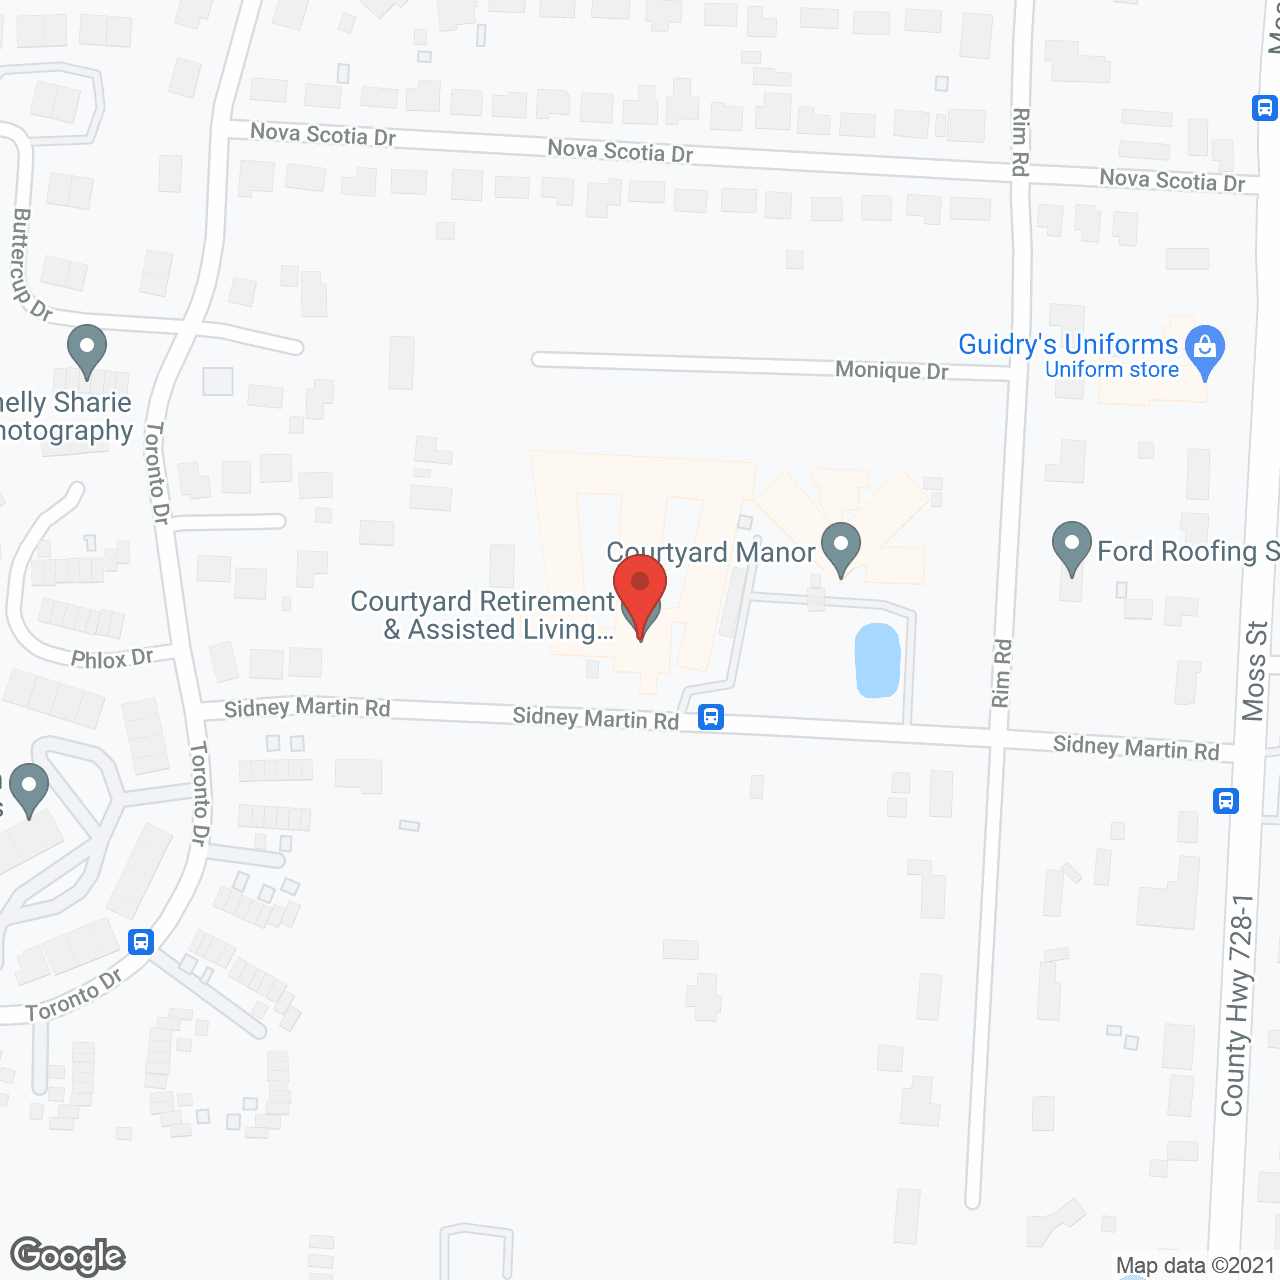 Courtyard Retirement and Assisted Living in google map